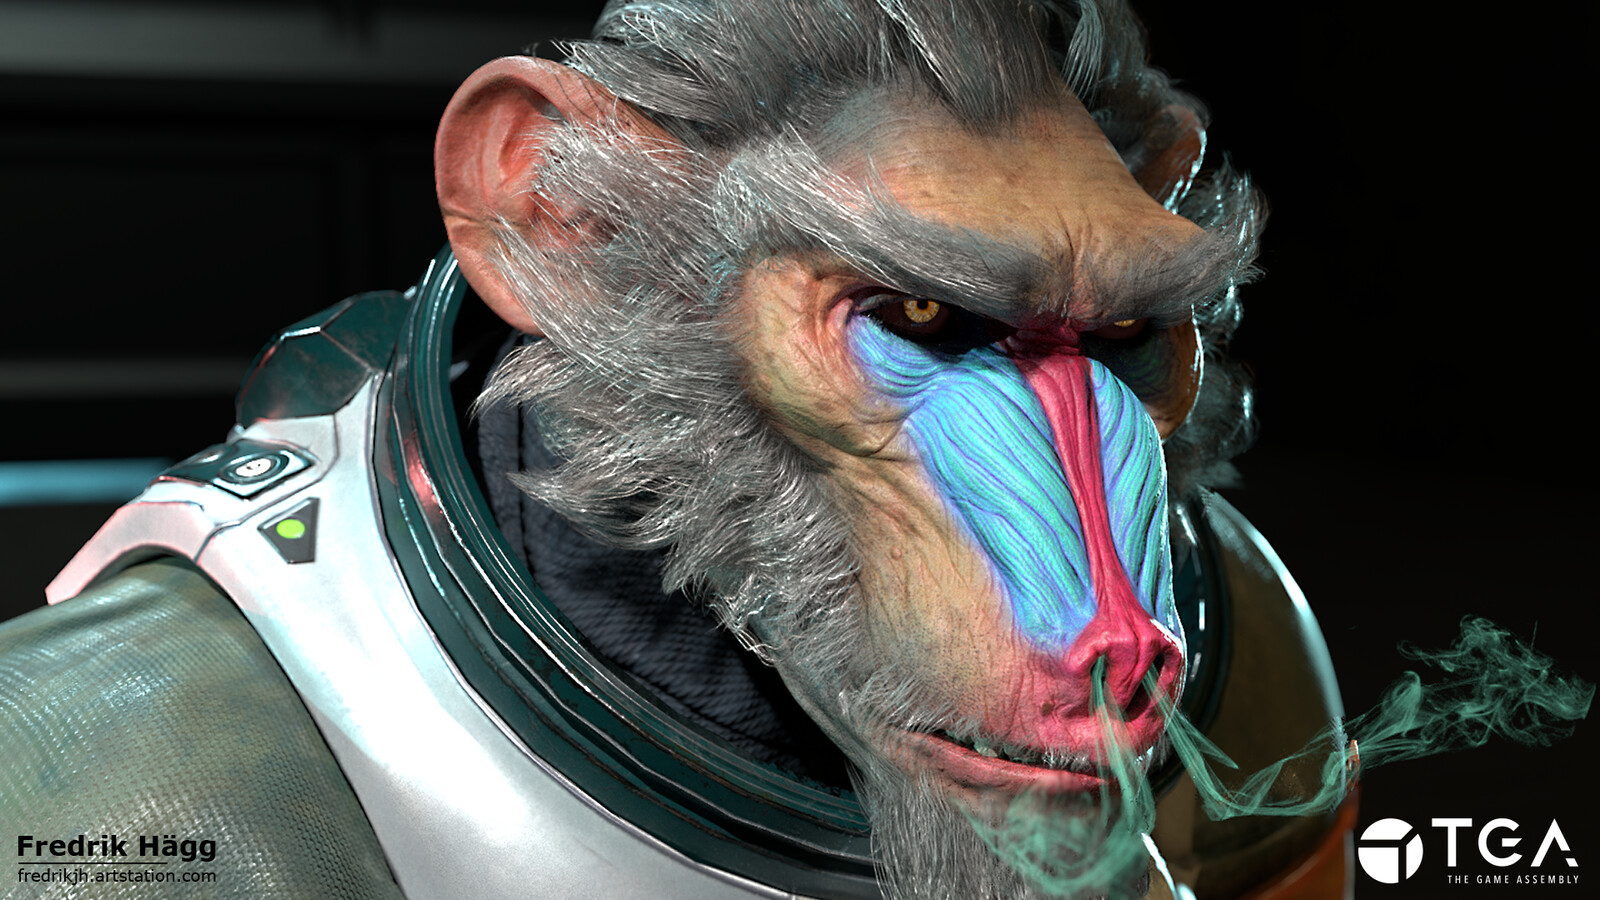 A grumpy hybrid between chimp, man and mandrill. He got into the bad habit of vaping the spicy space-juice during his travels in the Delta Cluster.